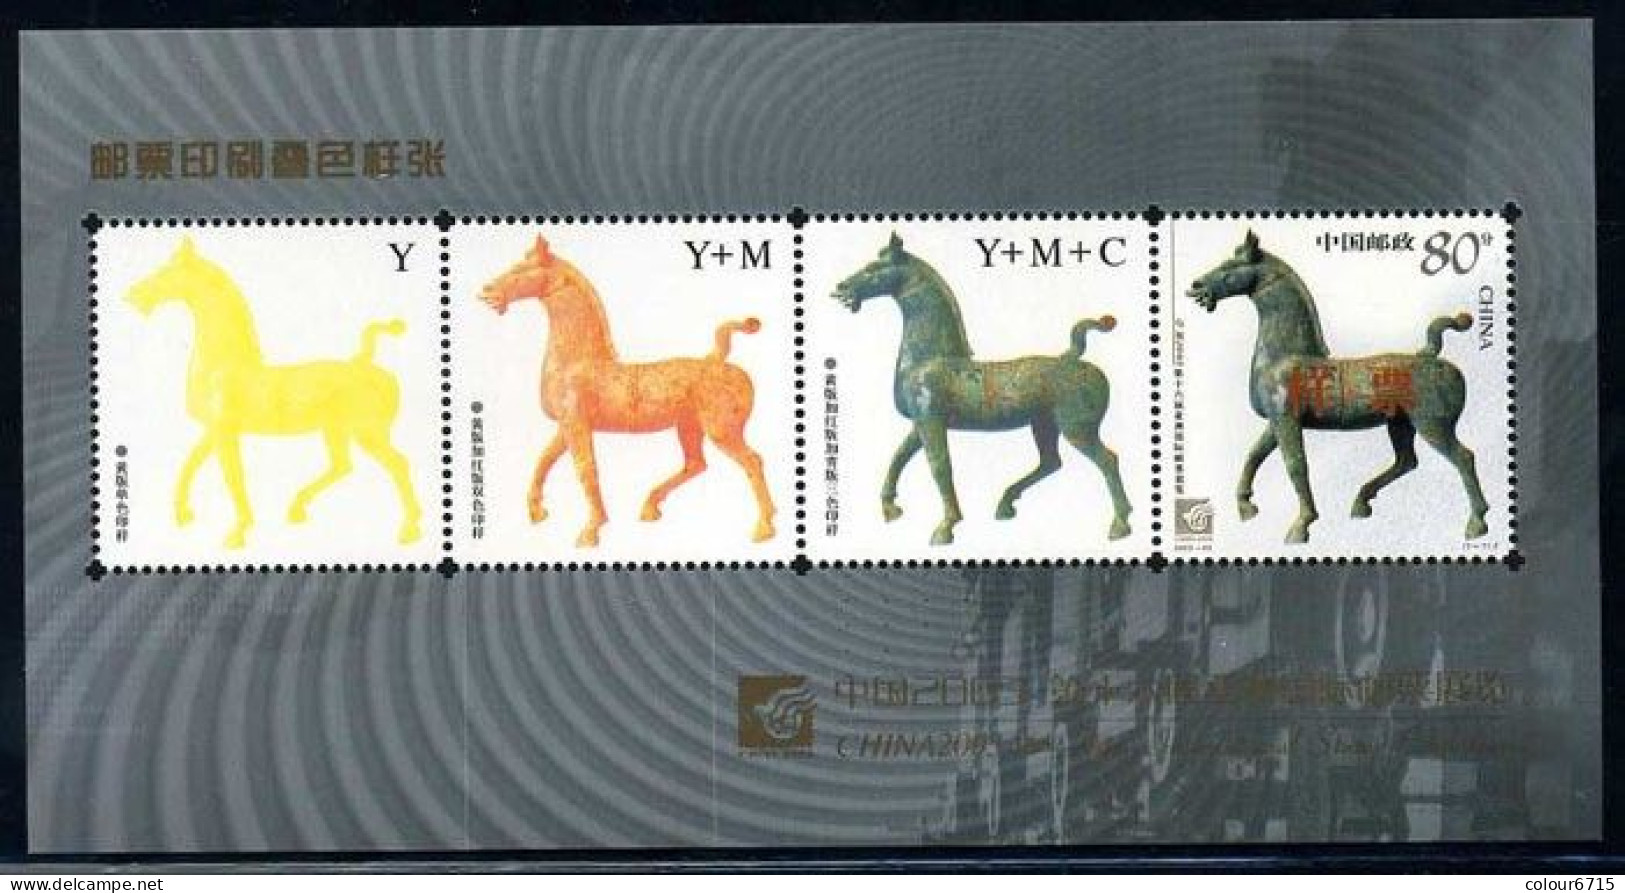 China 2003 Proof Specimen — Asian Stamp Exhibition Stamp MS/Block MNH - Proofs & Reprints